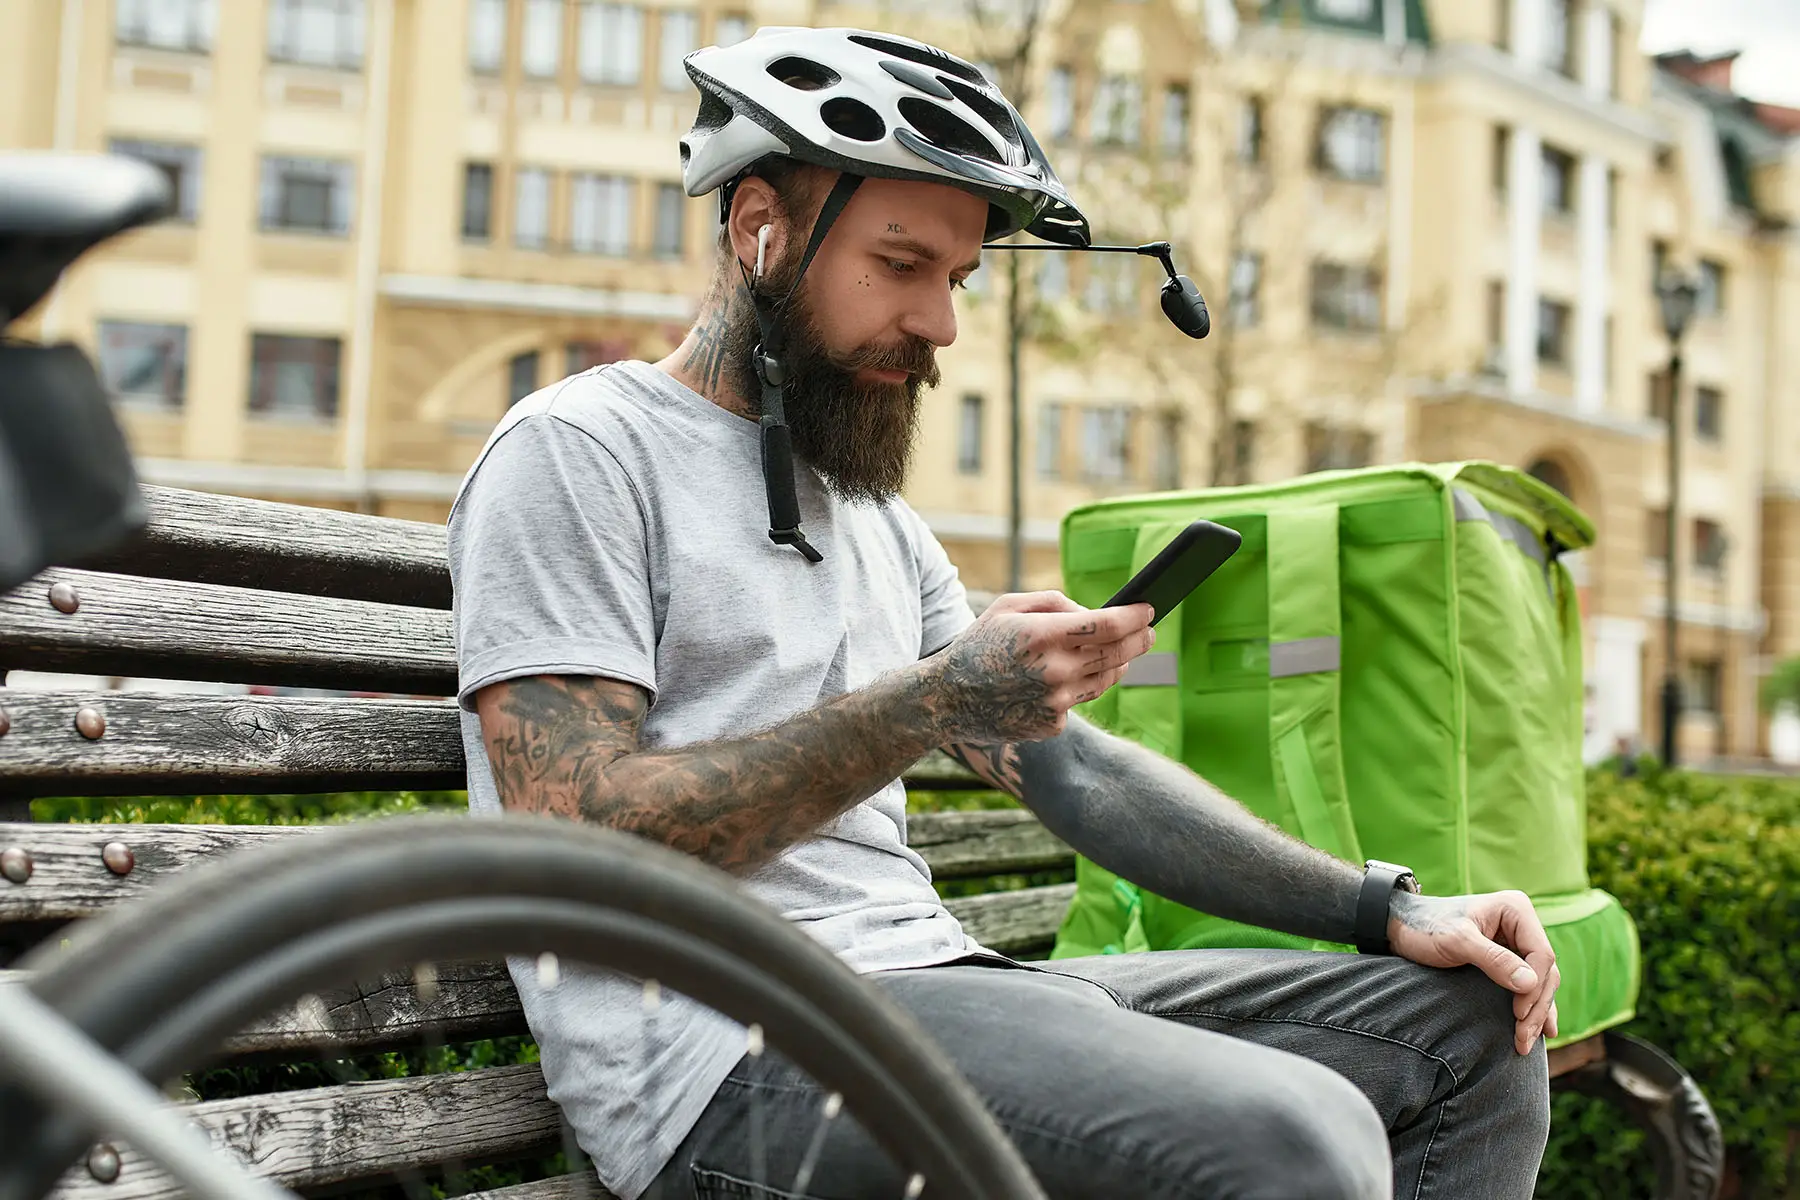 Tattooed delivery man with a helmet checking his phone while sitting on the bench outdoors. He has a green  thermo bag  next to him.